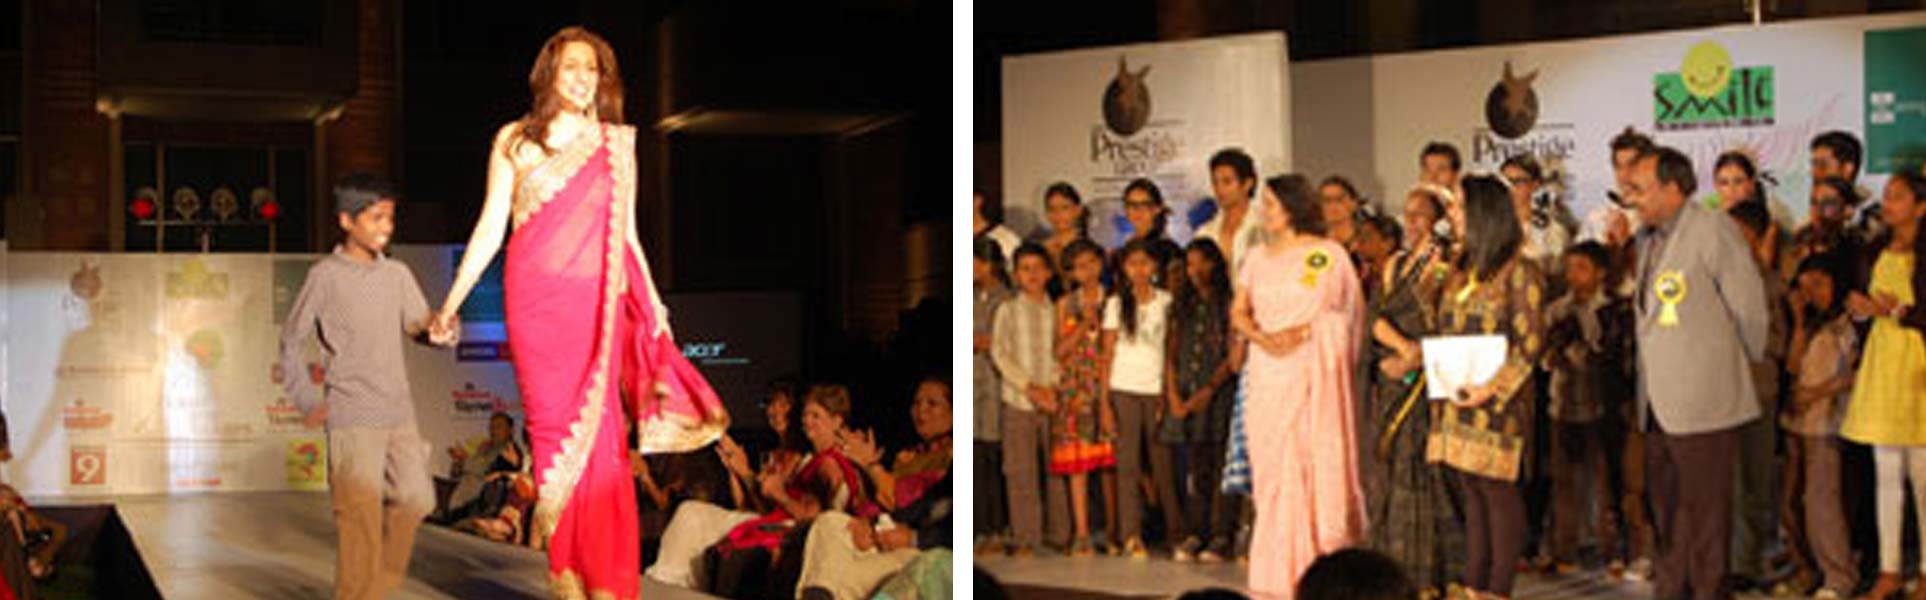 Ramp for Champs - a fashion show to educate children